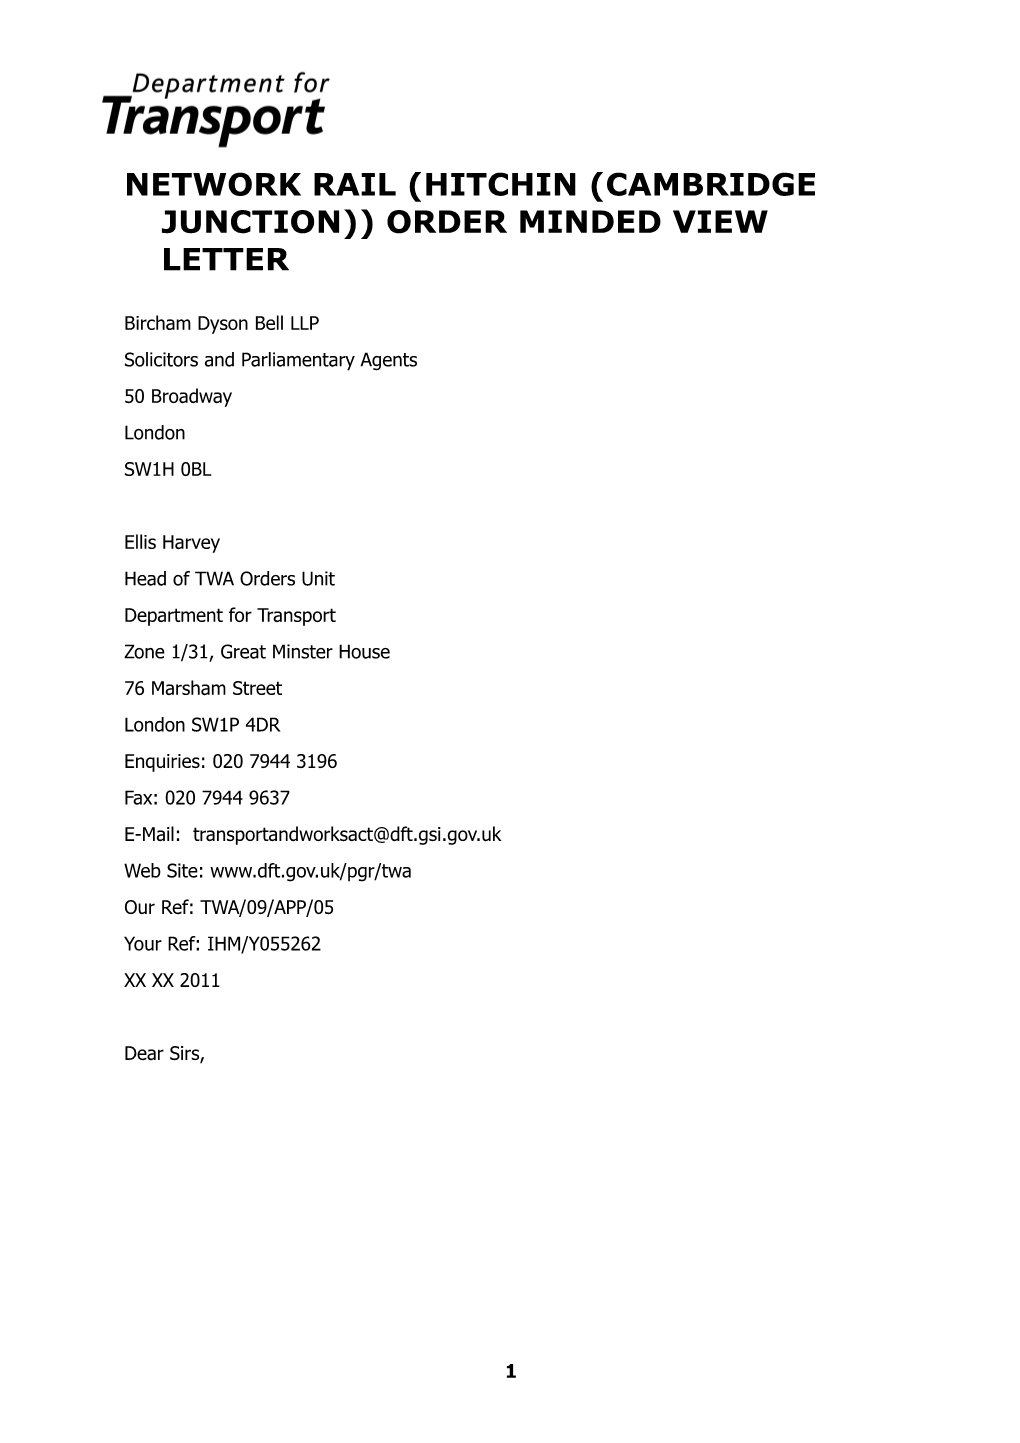 Network Rail (Hitchin (Cambridge Junction)) Order Minded View Letter